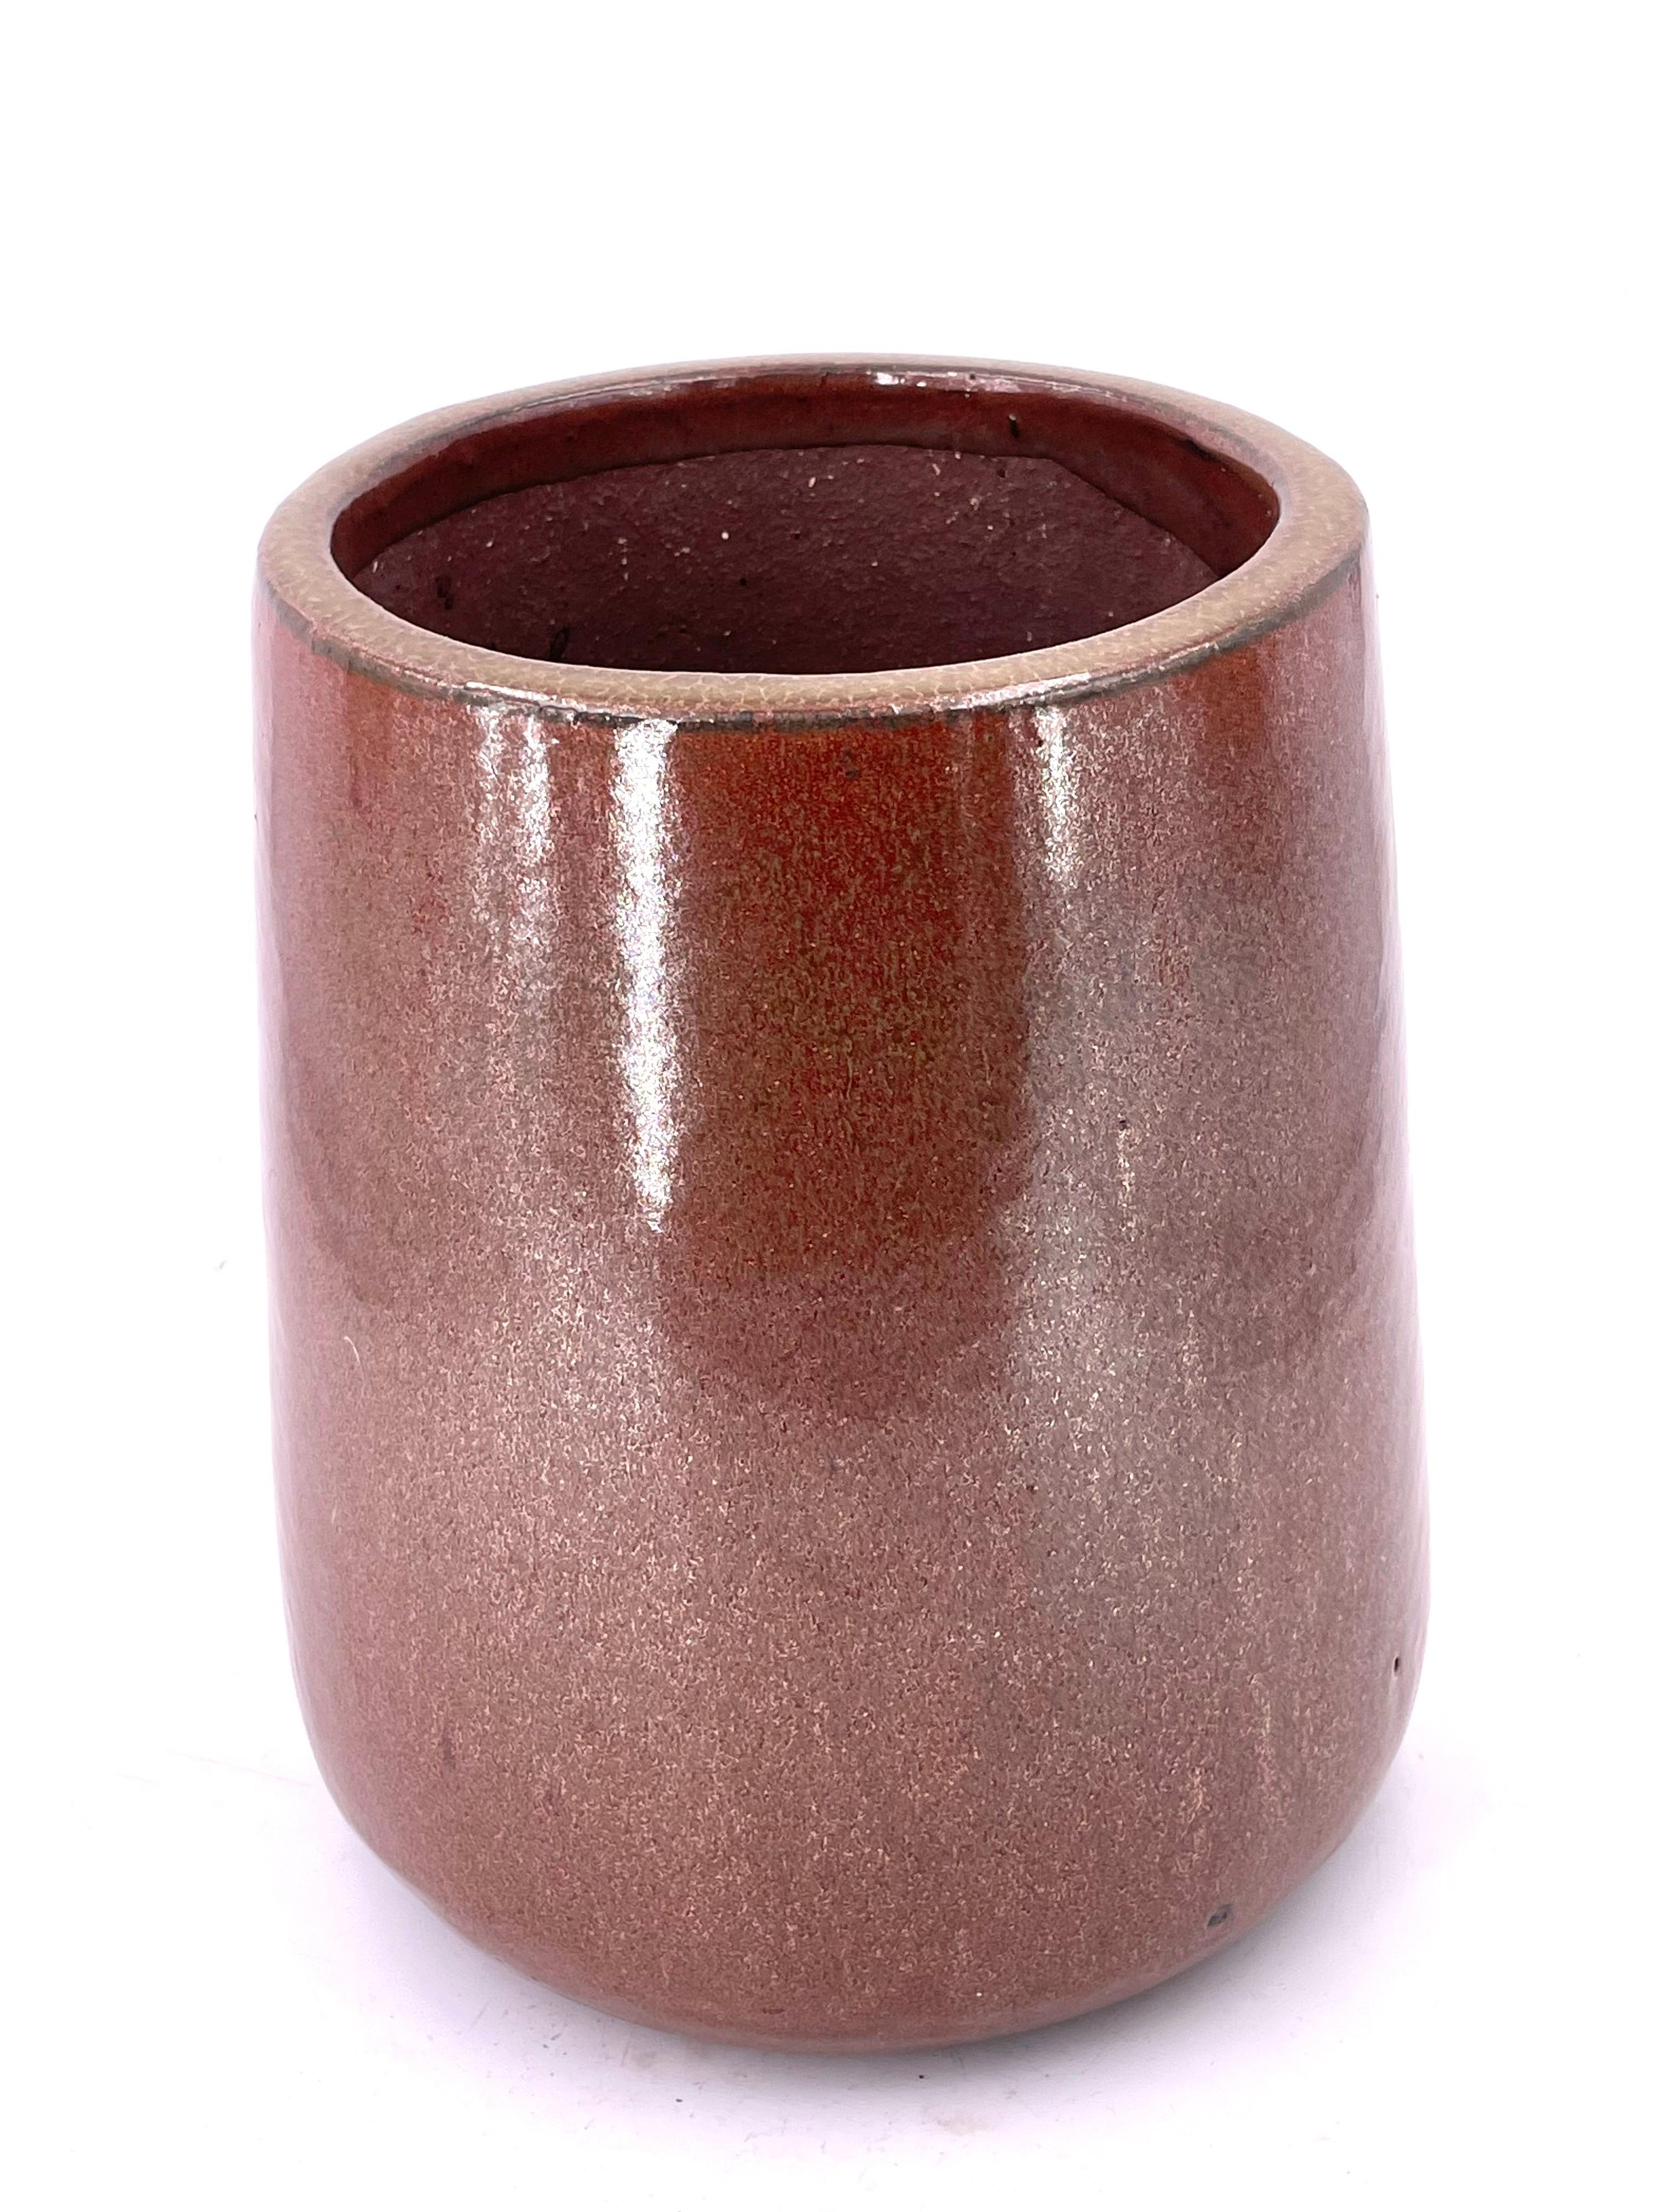 Beautiful glaze and shape on this unique planter architectural pottery style. With hole on the bottom for drainage.